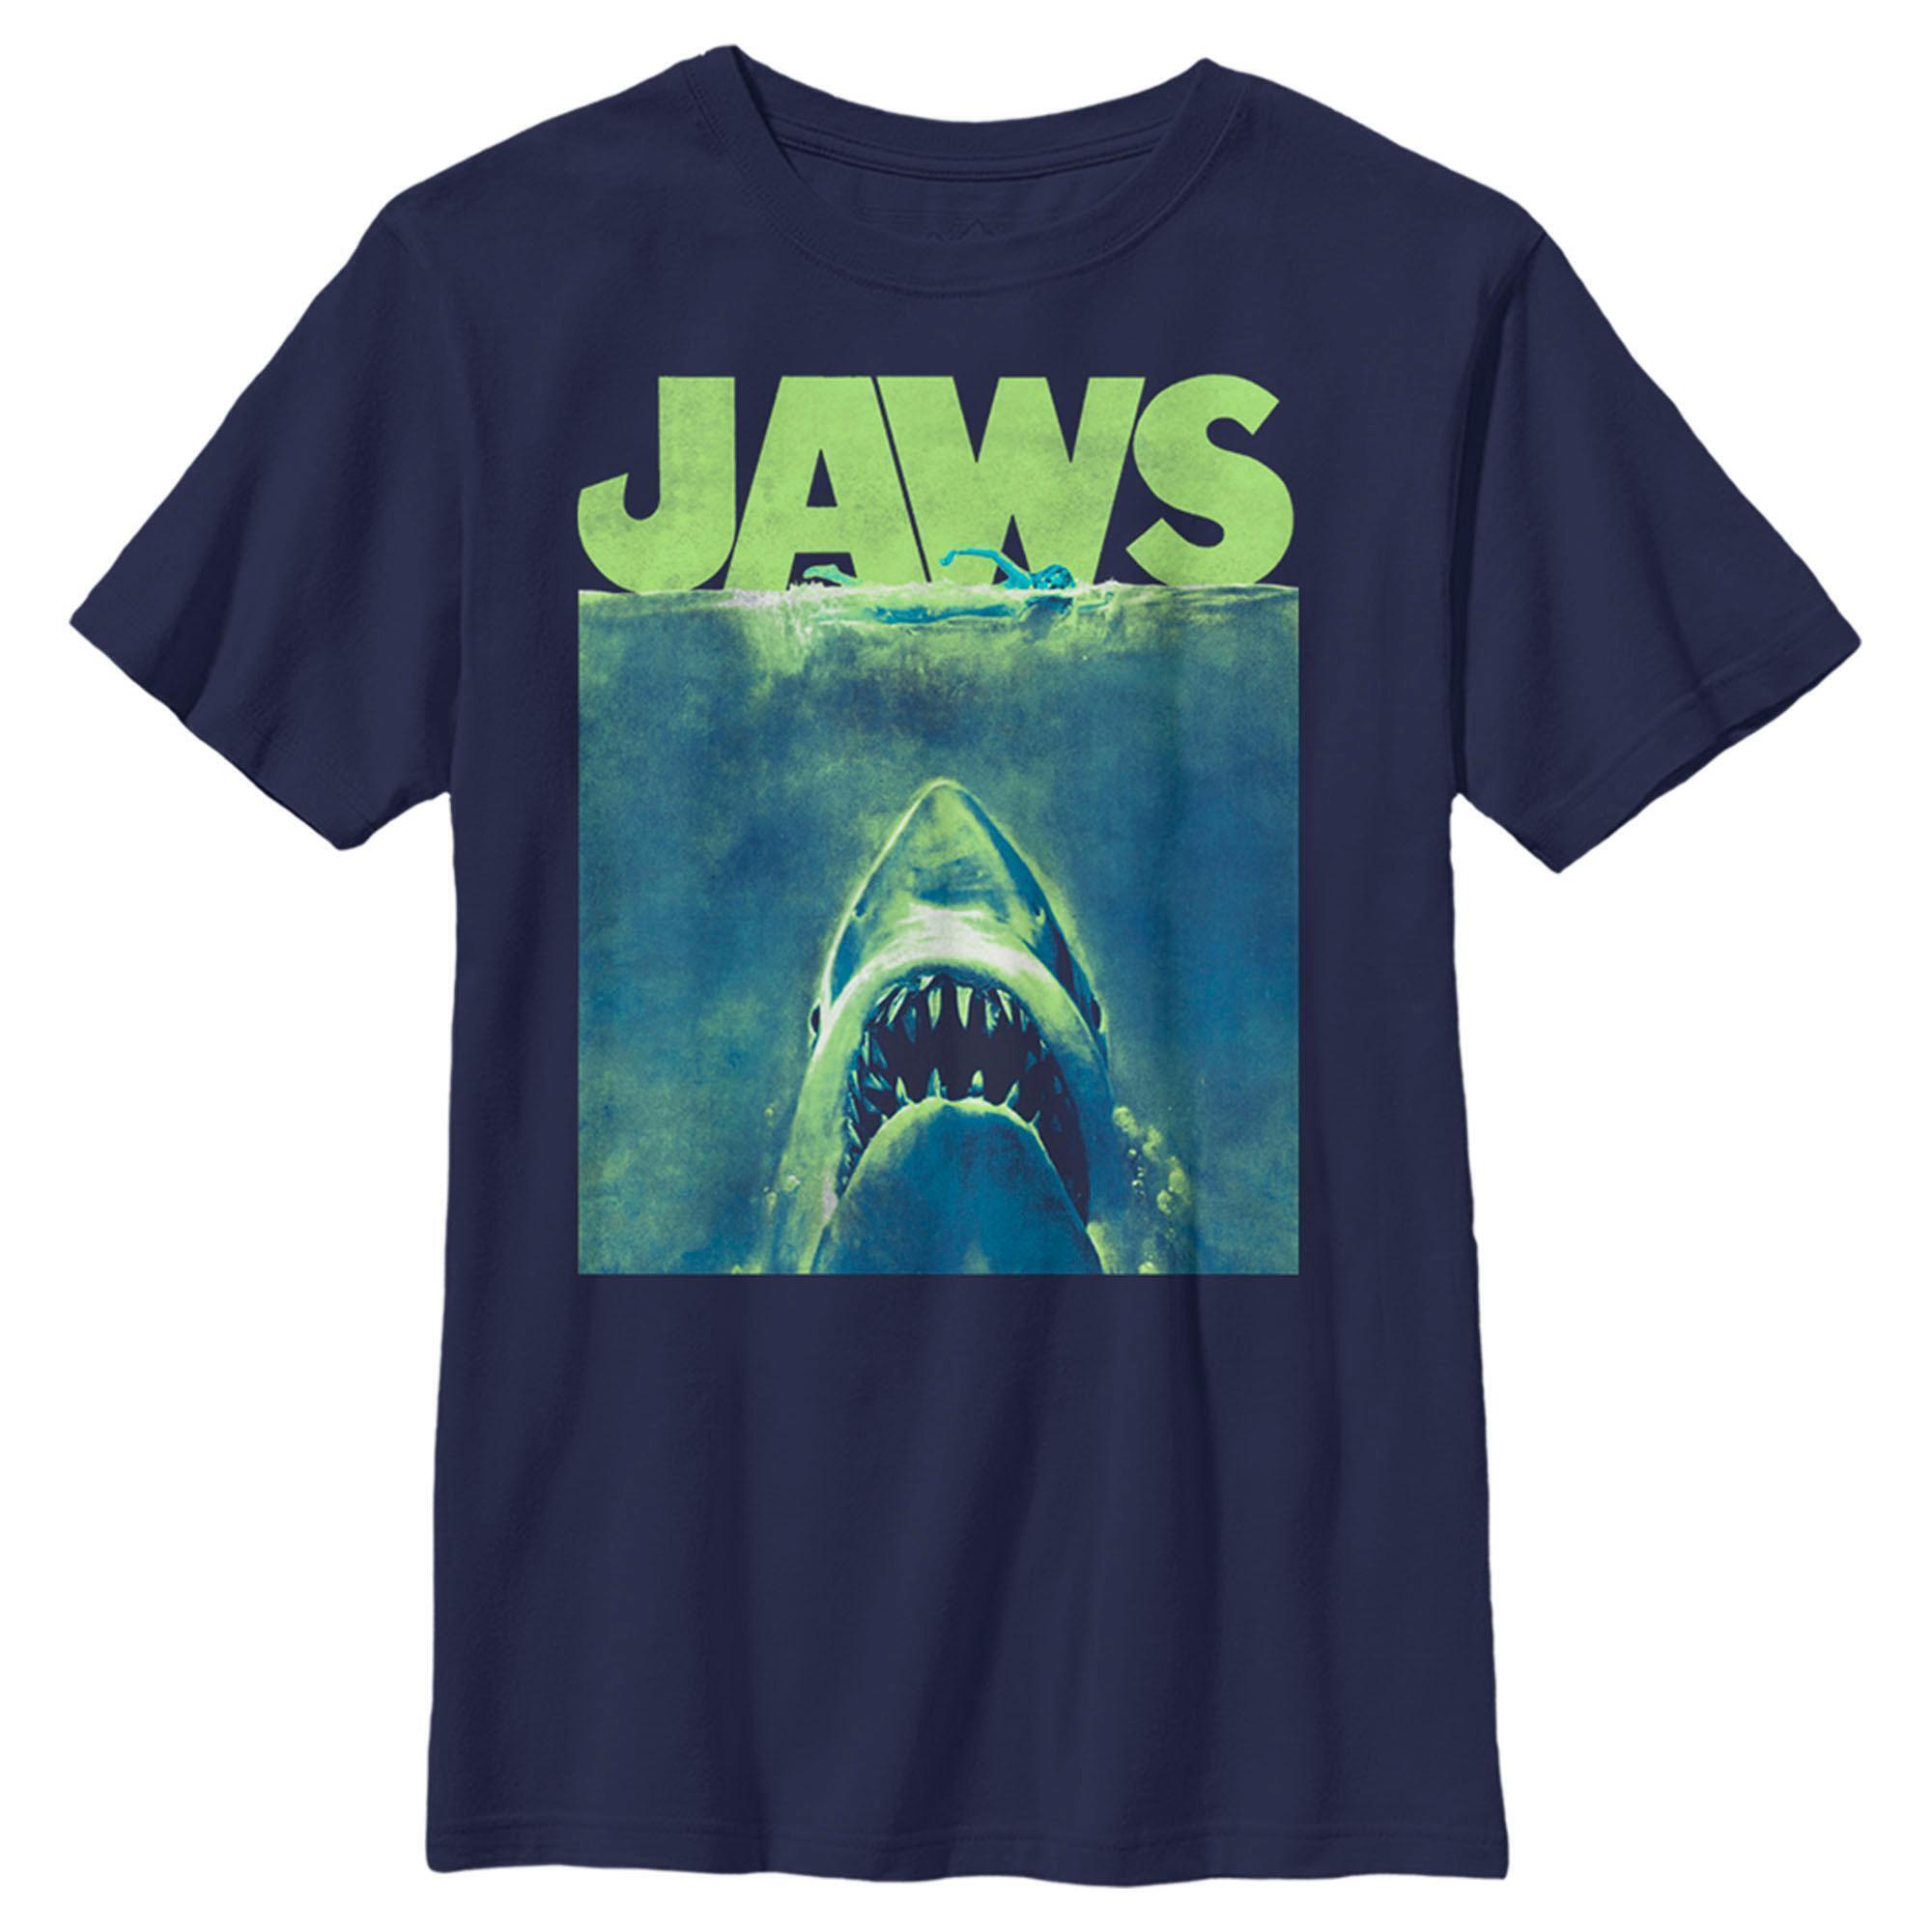 Boy's Jaws Neon Poster Graphic T-Shirt